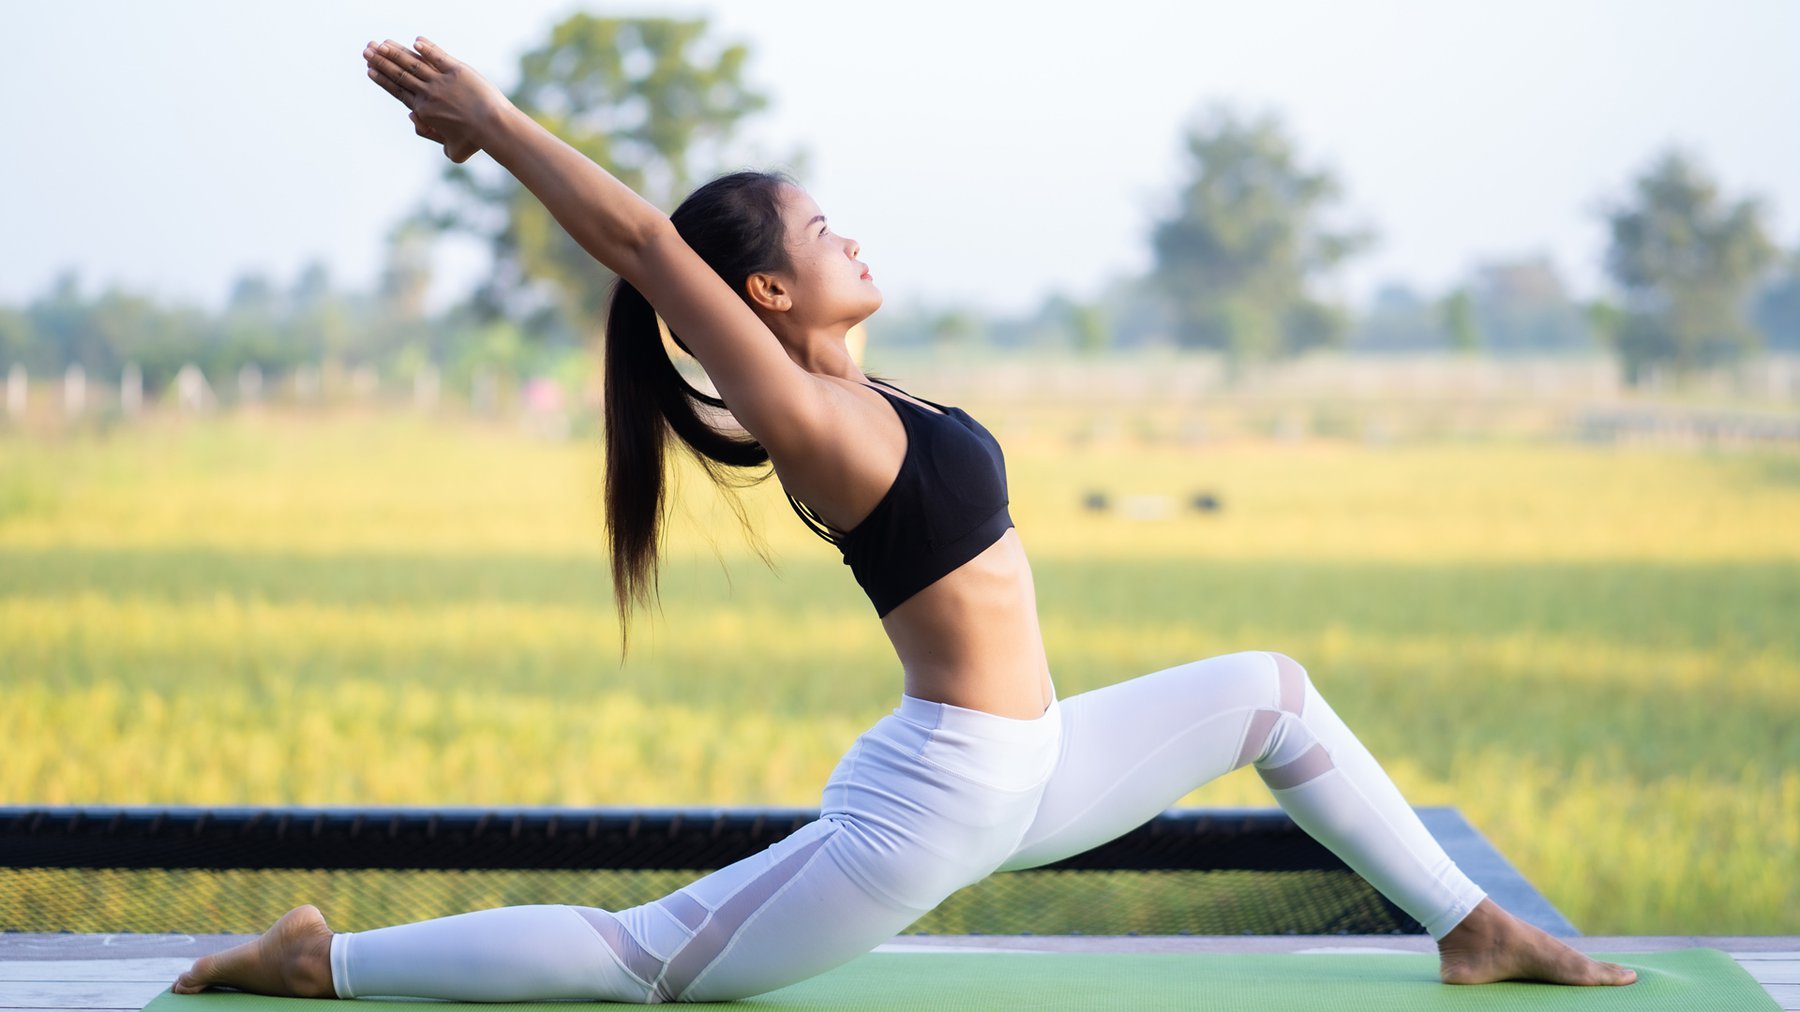 Blog - Four Yoga Poses You Should Do Before Bed - Therapedic - Therapedic